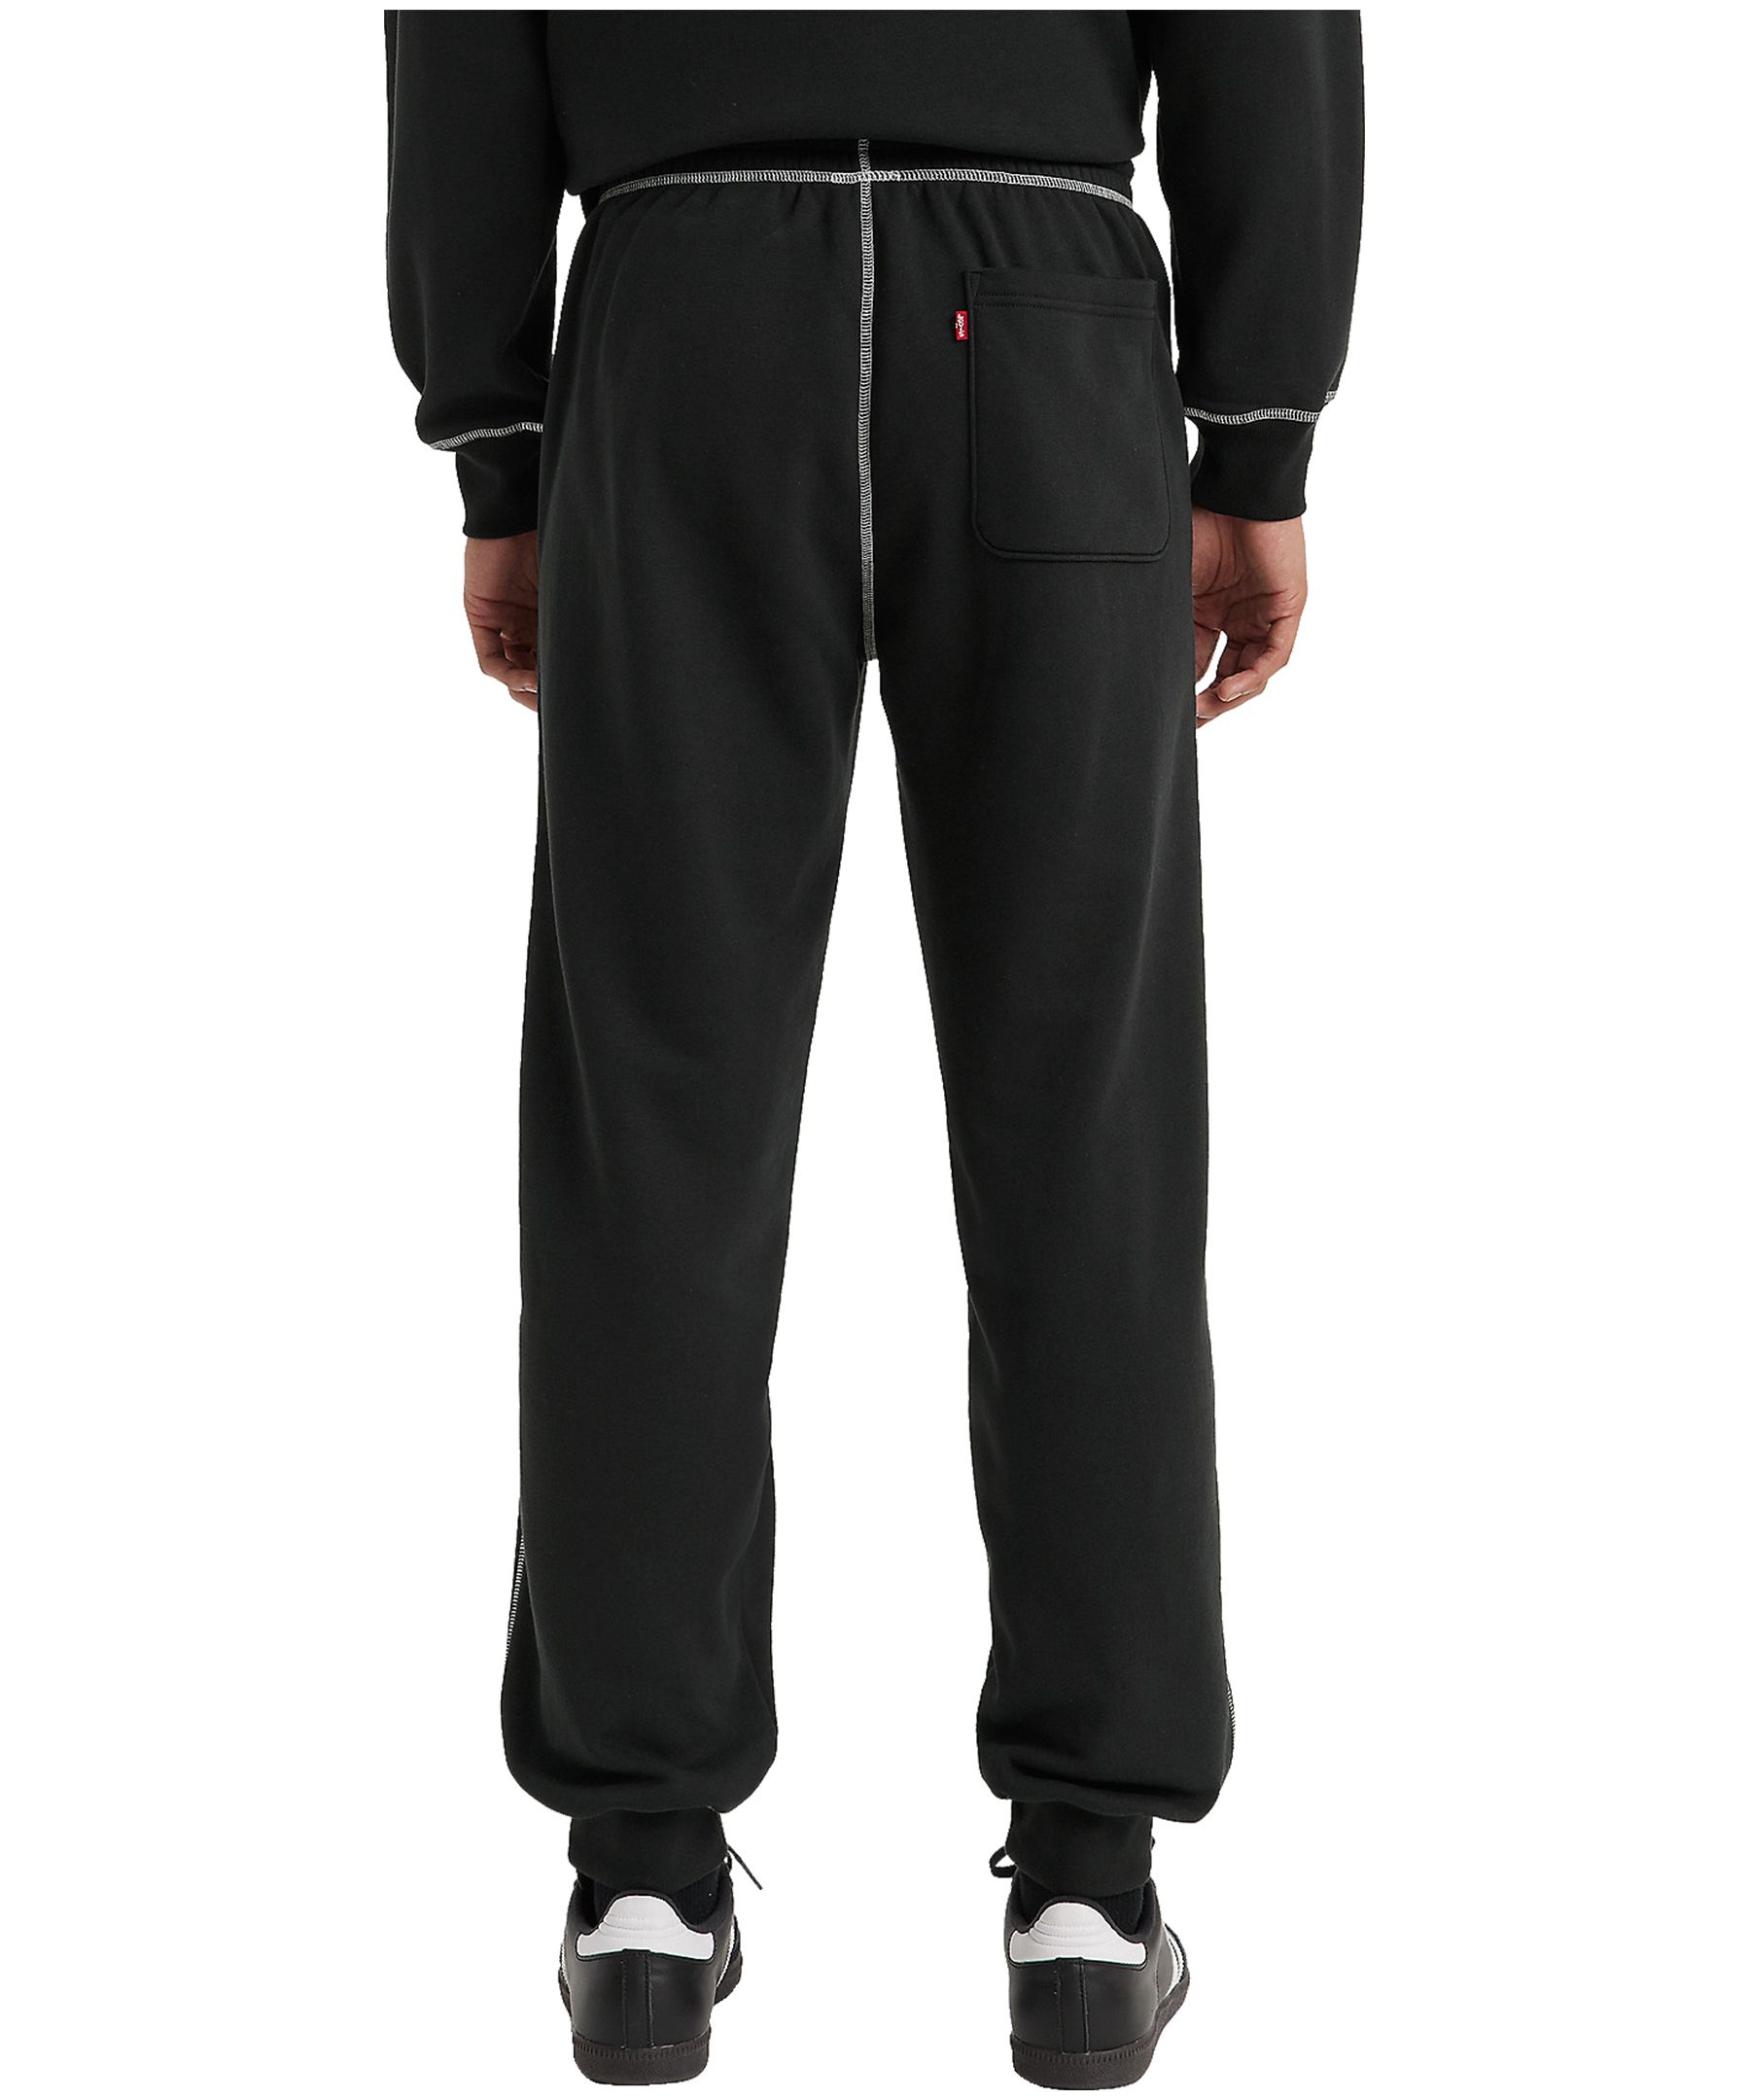 Levi's Men's Relaxed Fit Tapered Leg Fleece Jogger Sweatpants